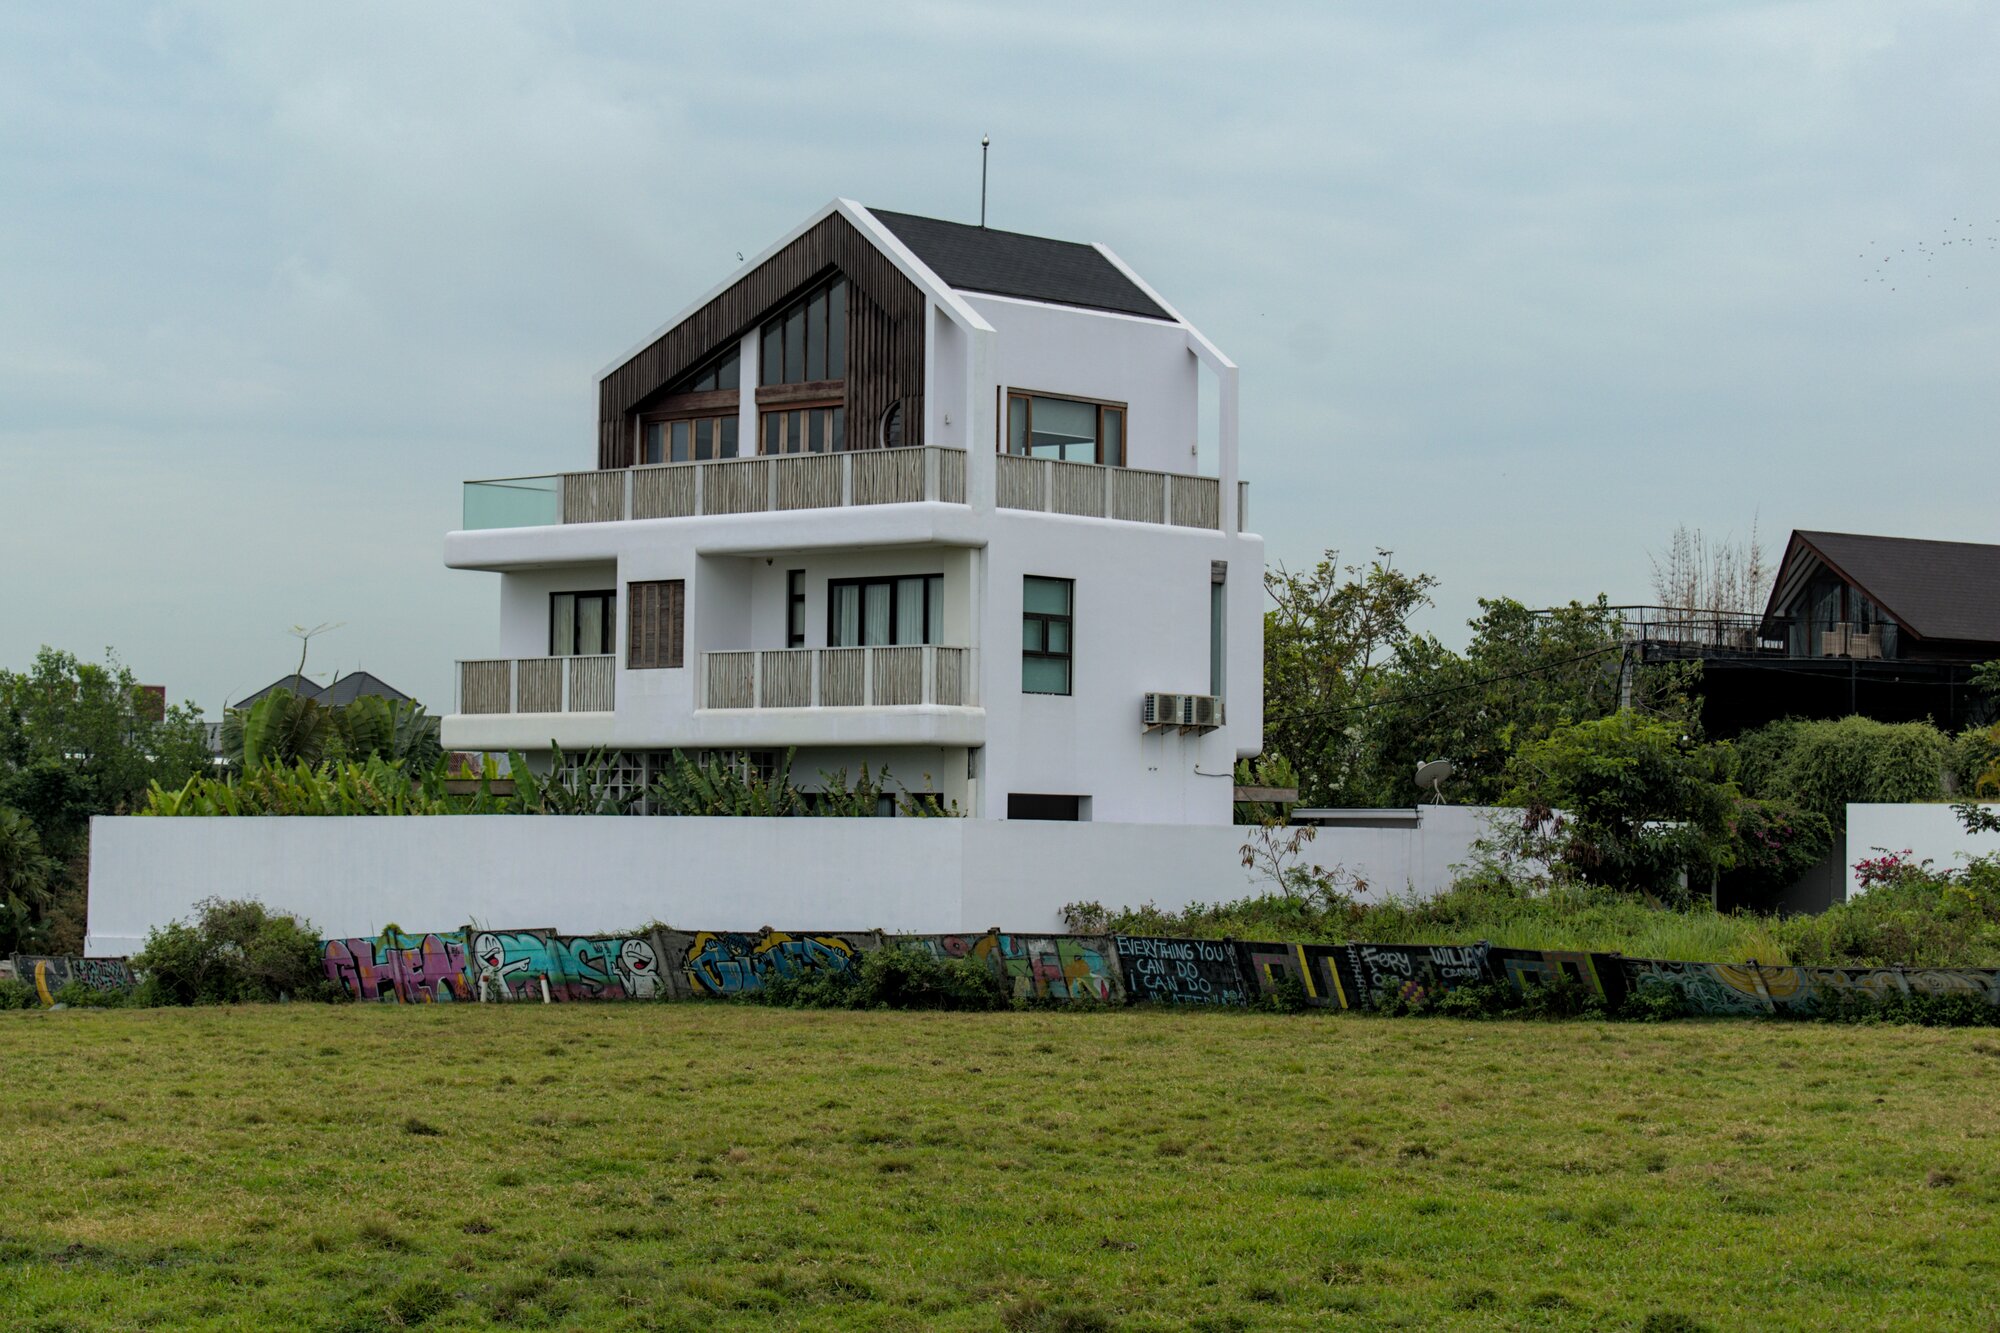 A striking large, white three-story villa behind a grass field with a low fence covered in colorful graffiti, mostly in English.